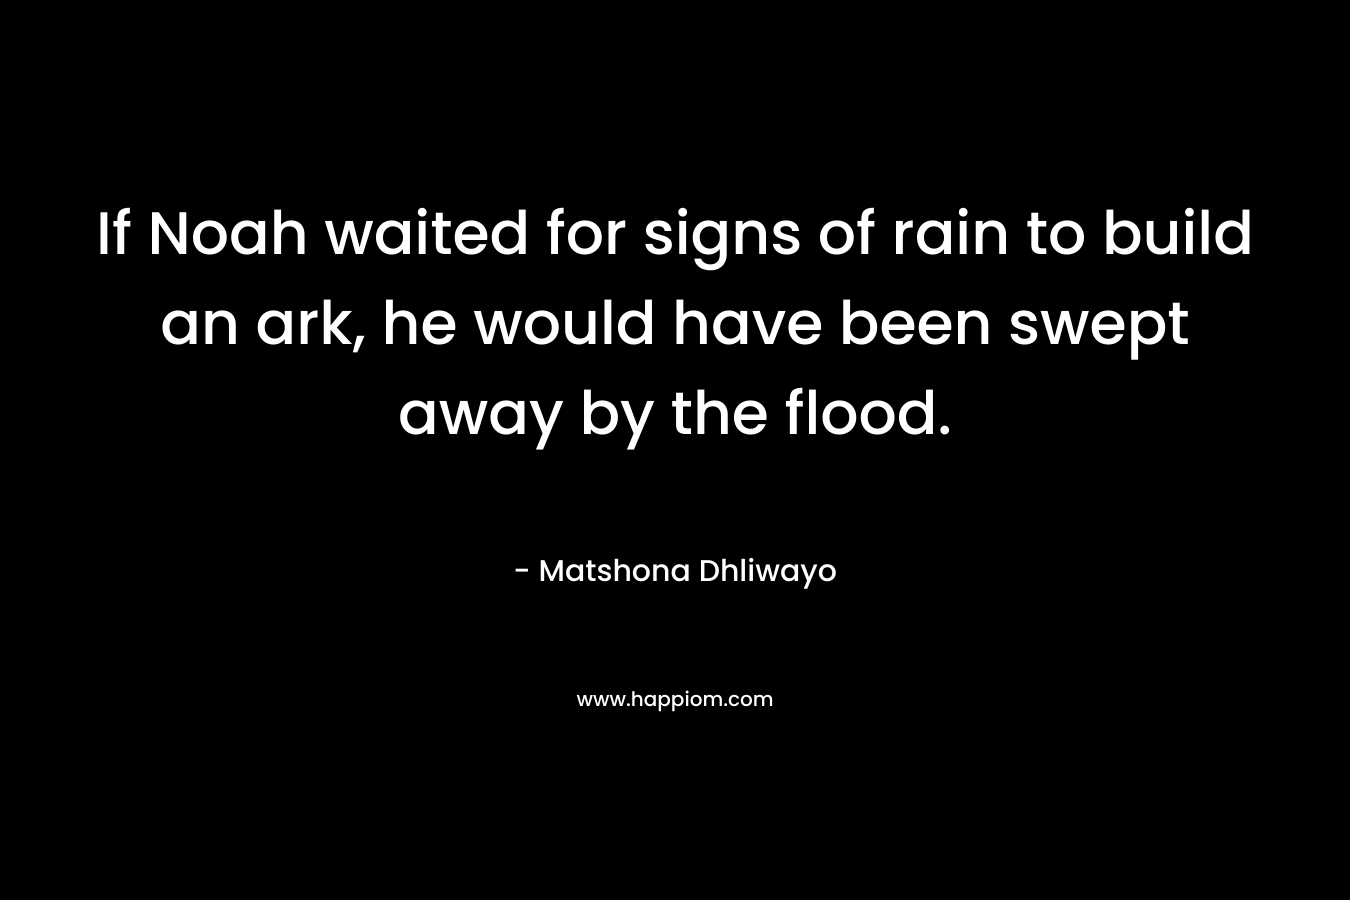 If Noah waited for signs of rain to build an ark, he would have been swept away by the flood.